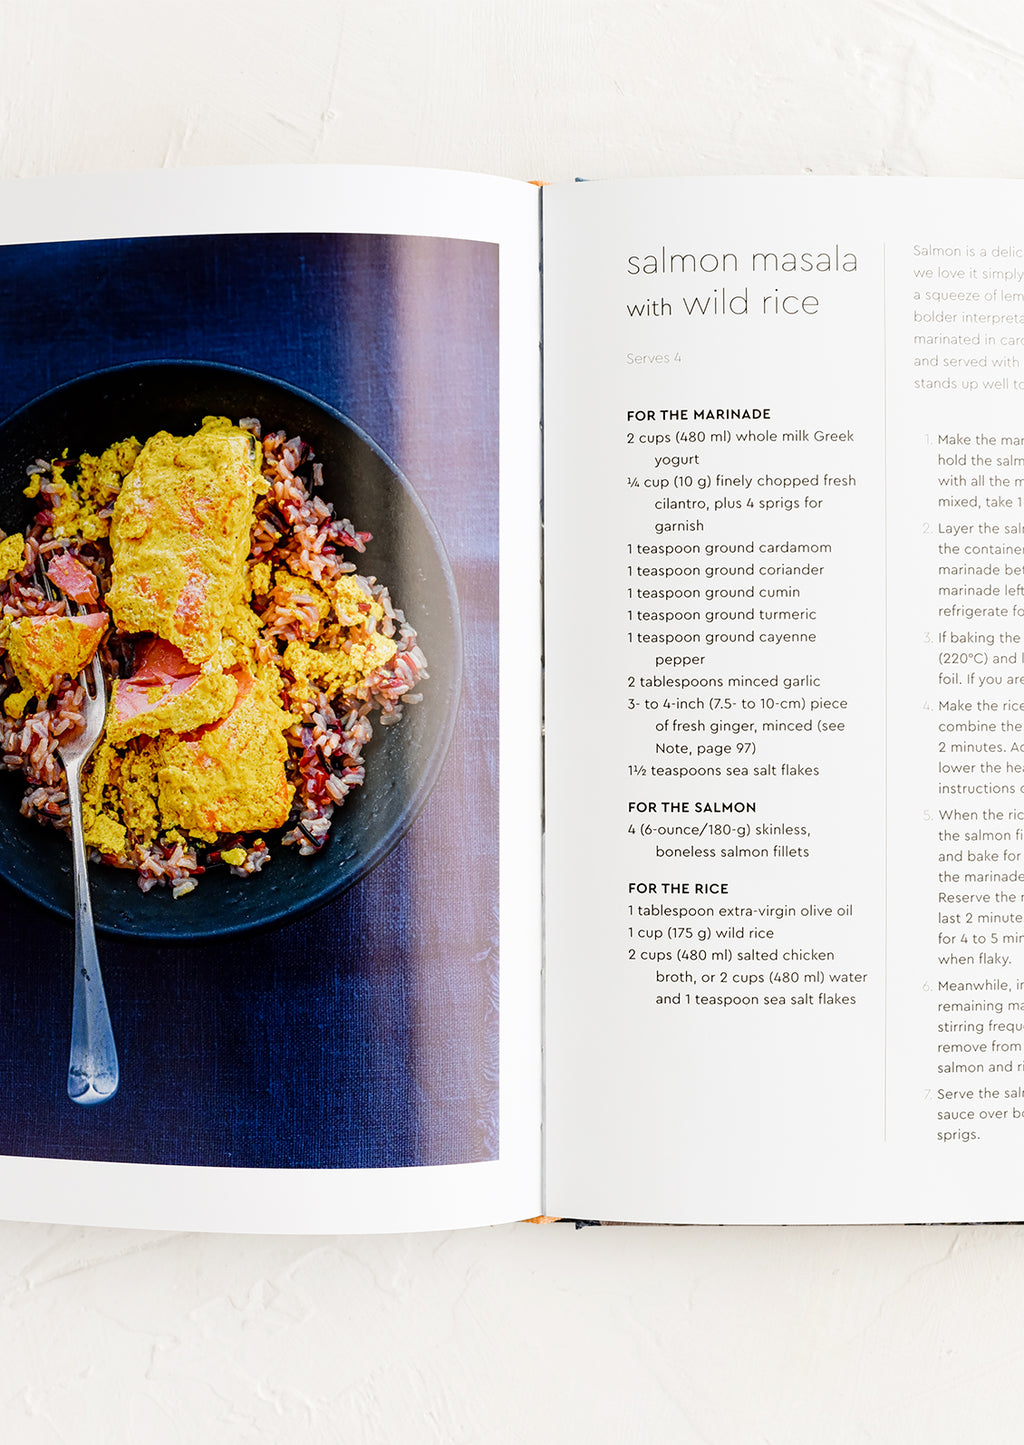 3: A cookbook open to a page with recipe for salmon masala with wild rice.